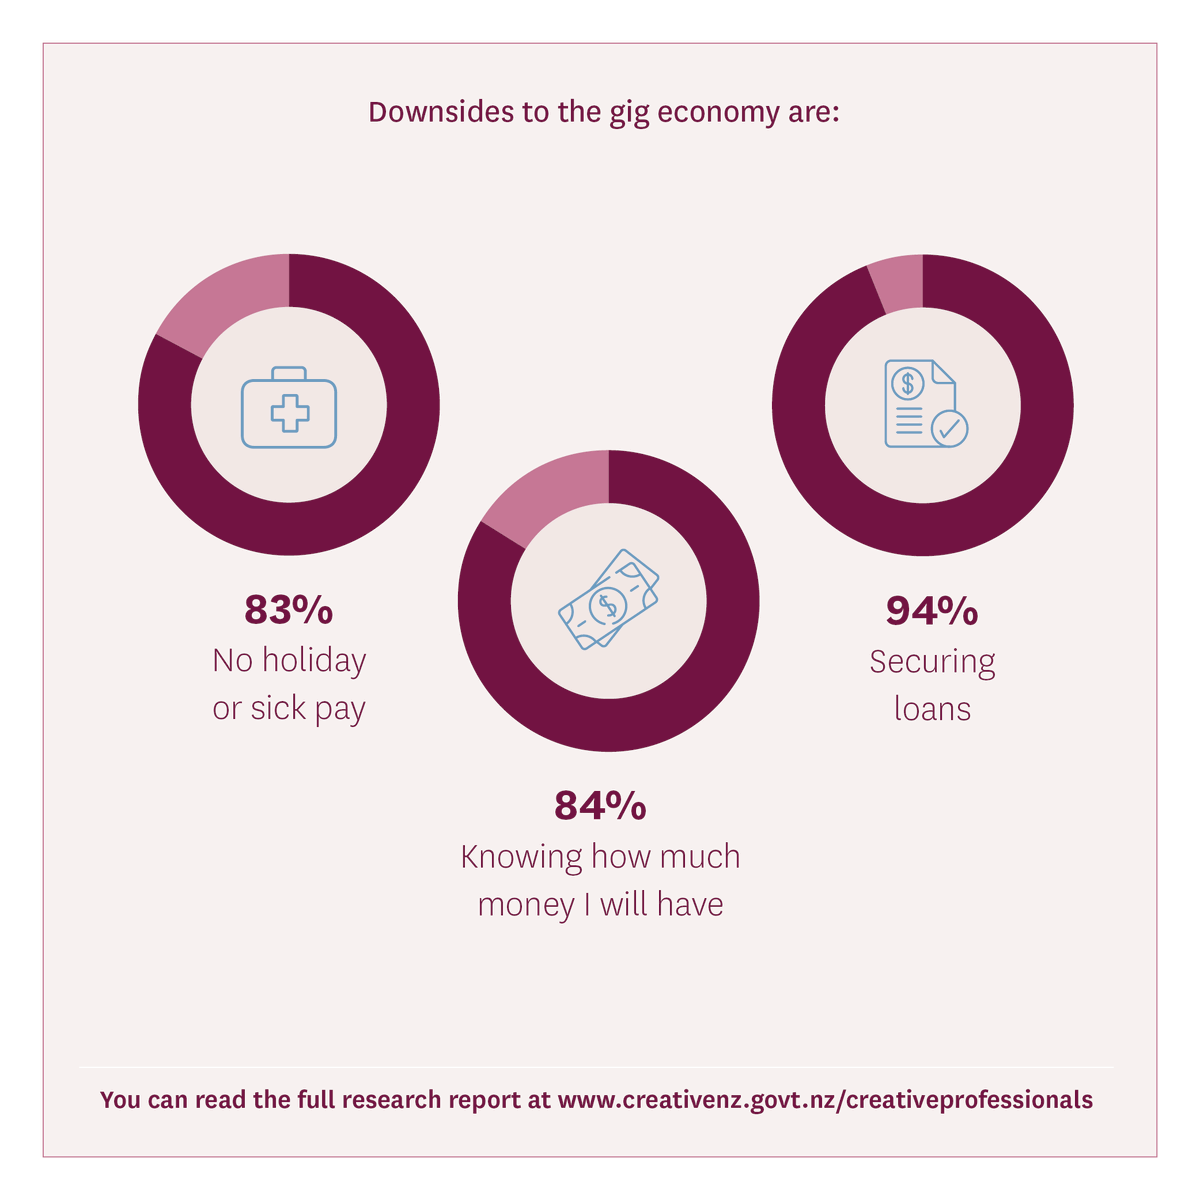 Our Profile of a Creative Professional research shows the downsides of being part of the gig economy. 71% of creative professionals identify as working in the gig economy. It’s hard to plan and feel secure financially. More here: ow.ly/nMlM50Oz7R5